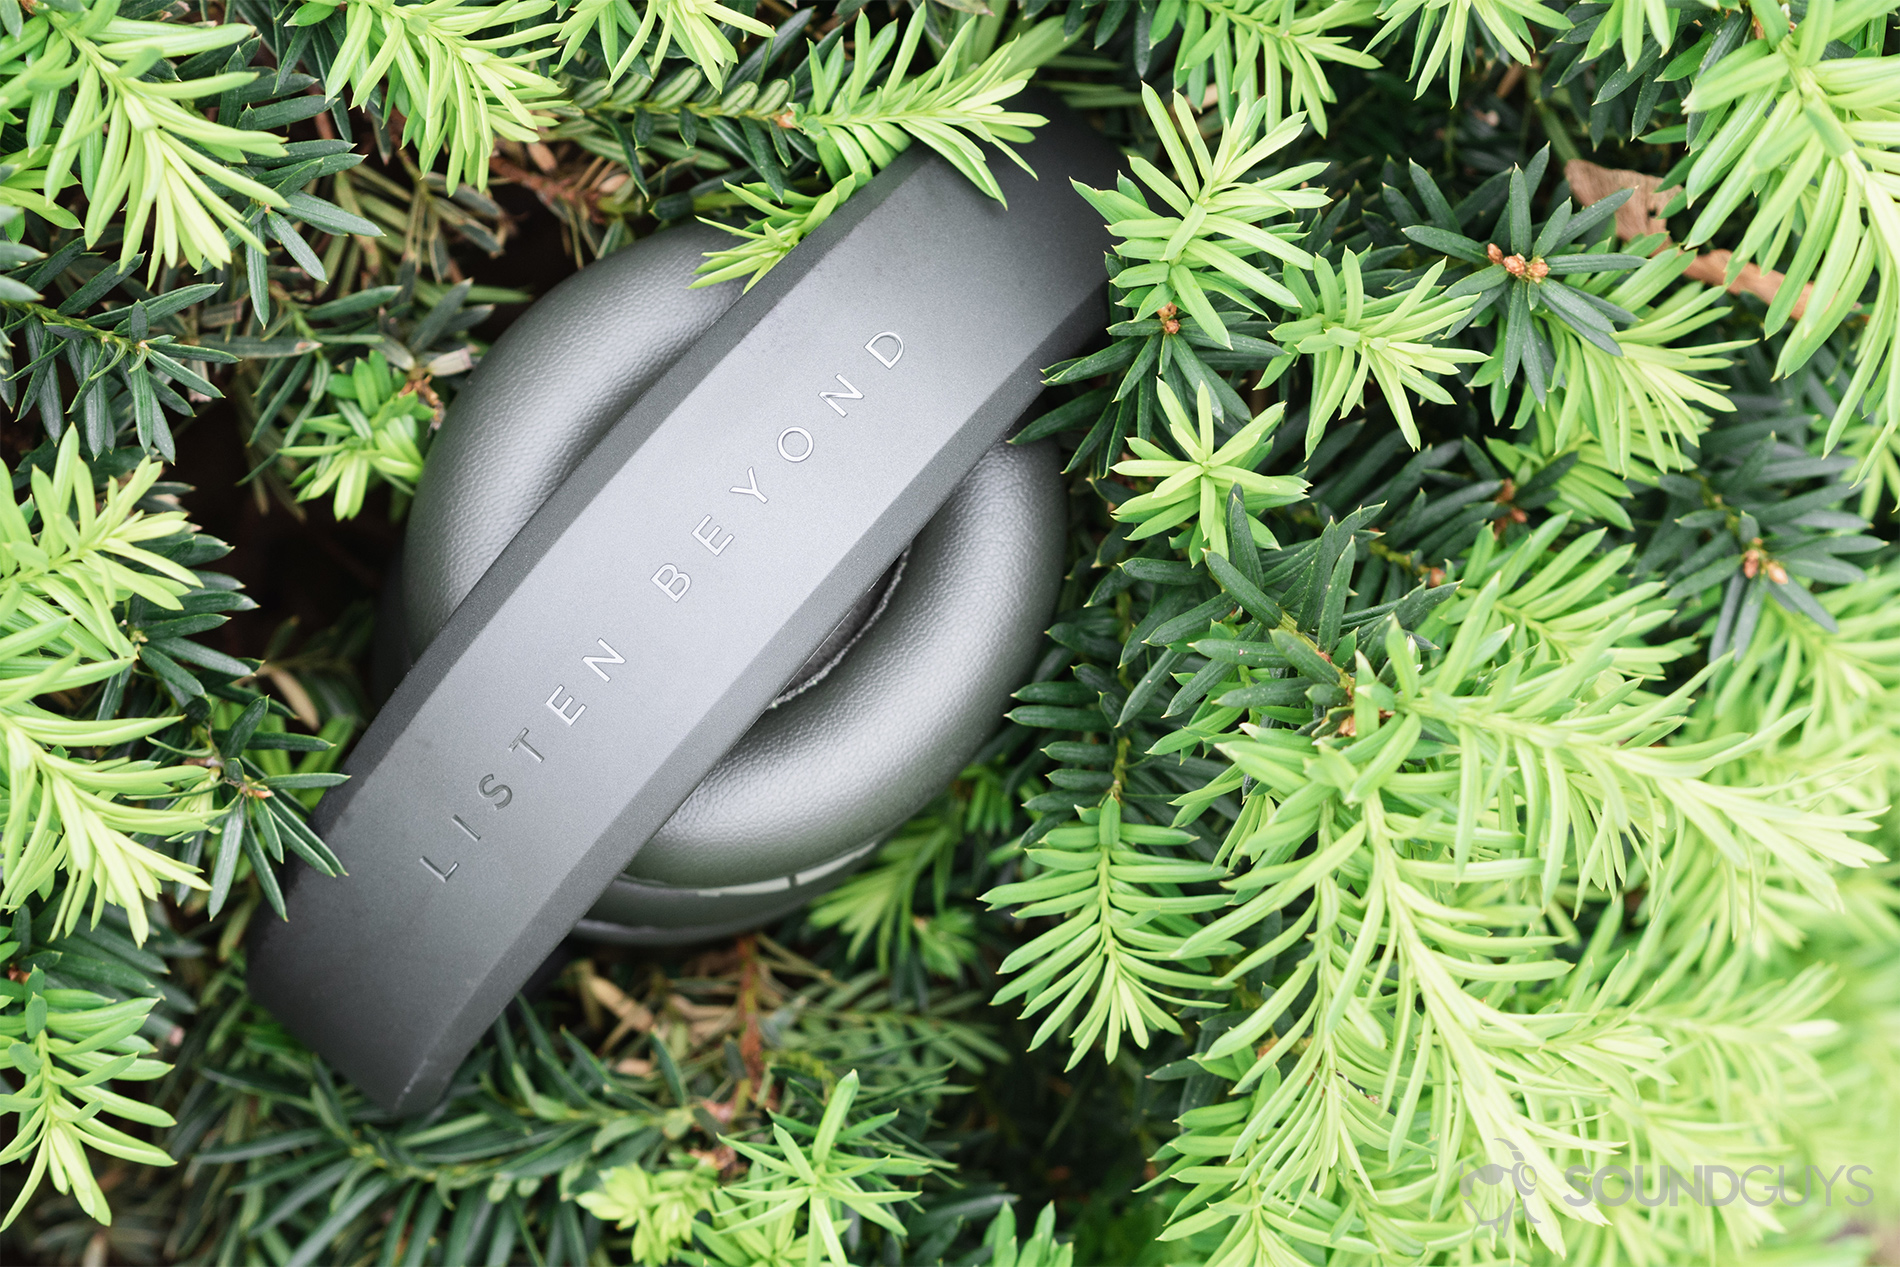 Anker Soundcore Vortex review: The headphones (olive) folded up and resting in a bright green shrub.